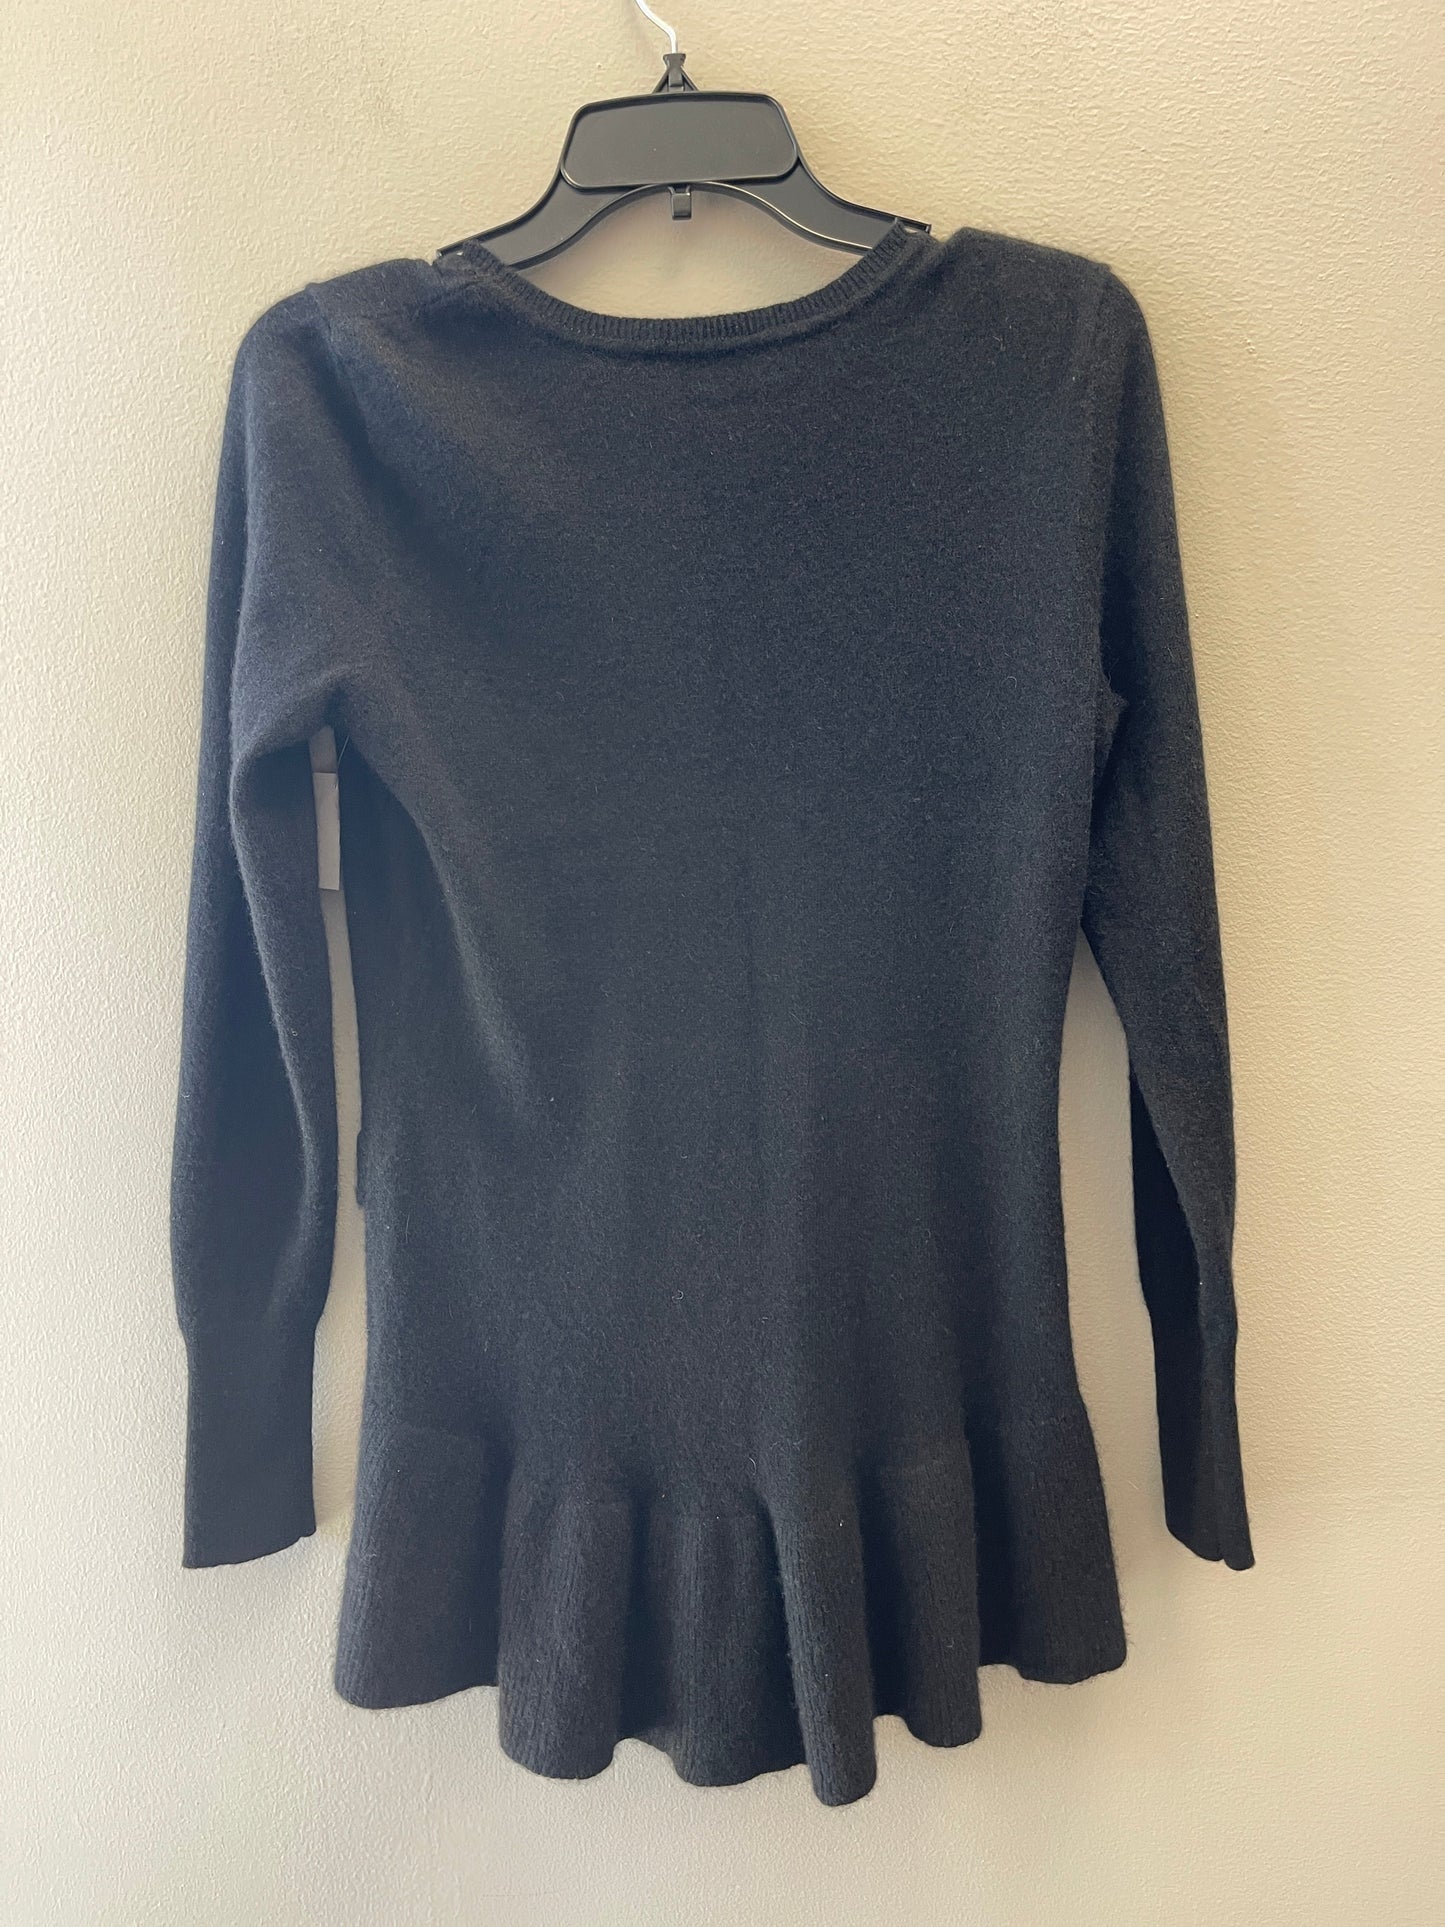 Sweater By Isaac Mizrahi Live Qvc  Size: S